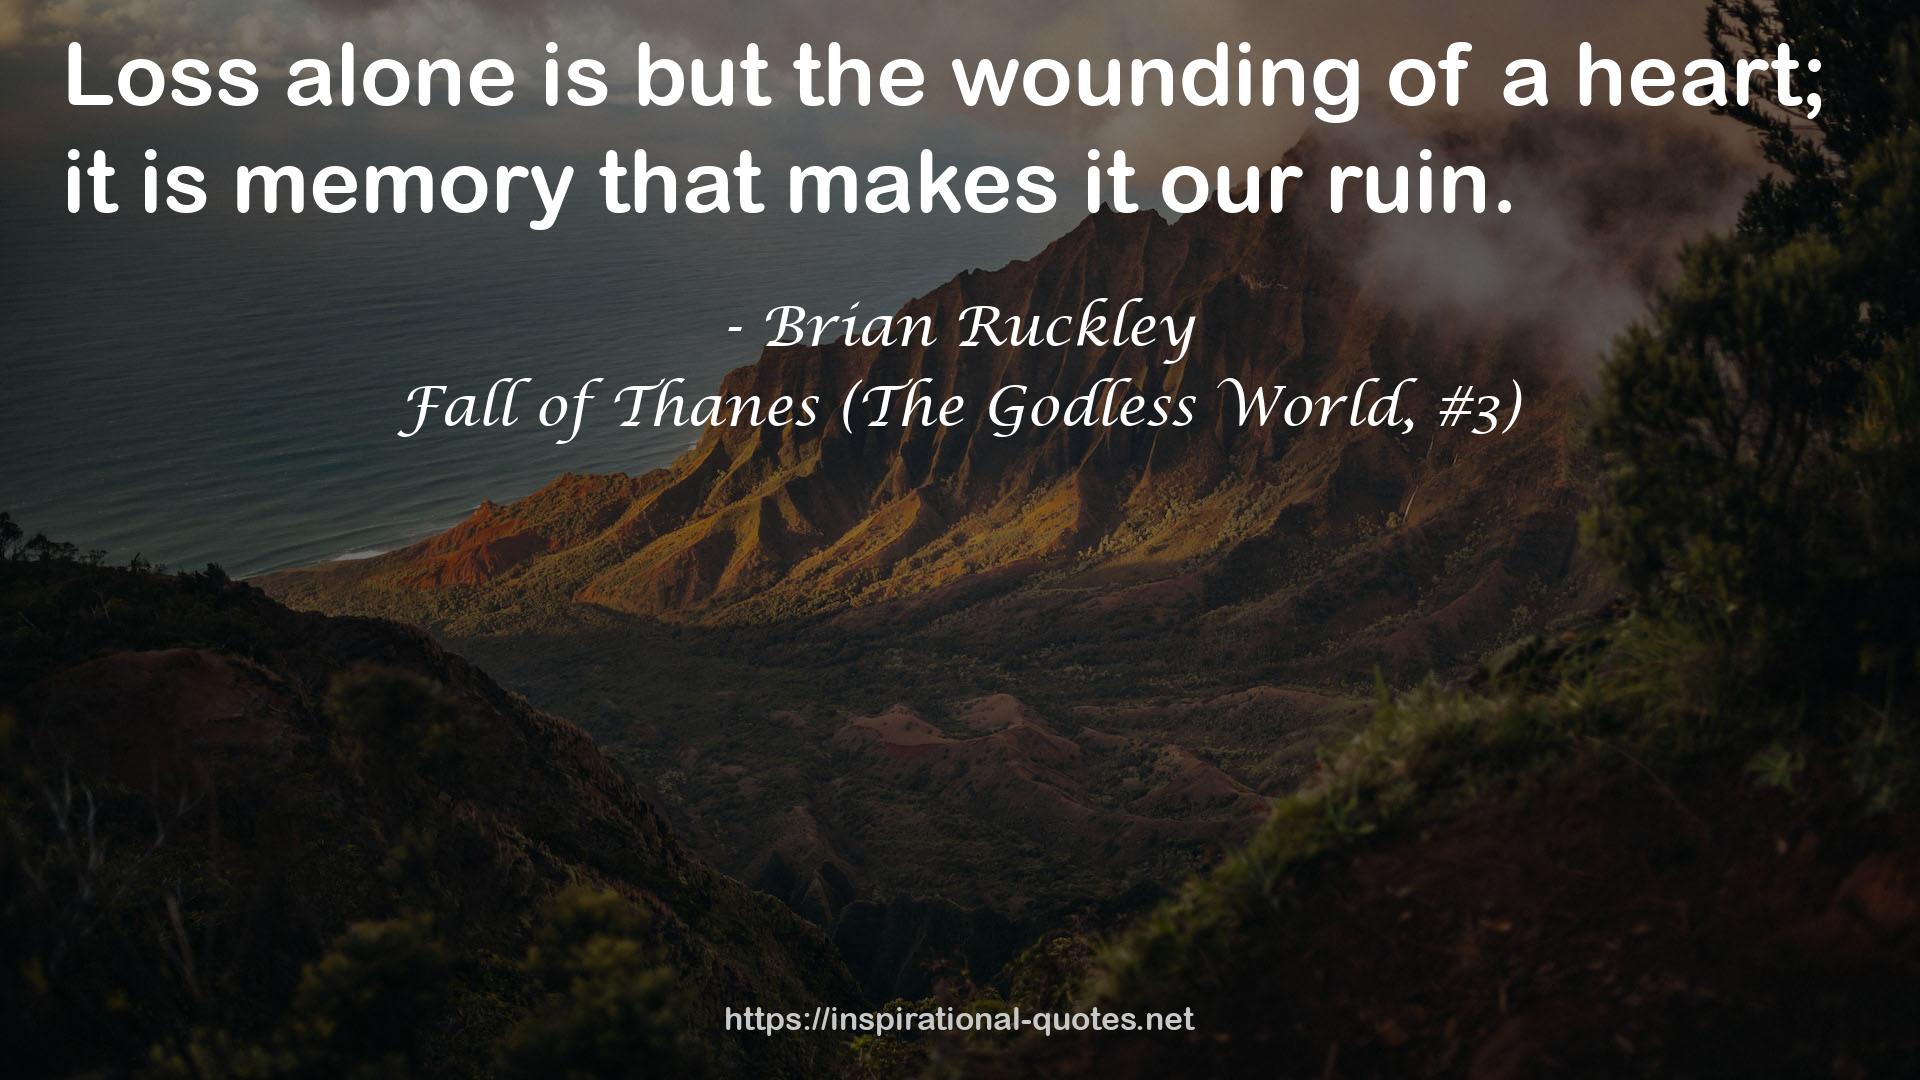 Fall of Thanes (The Godless World, #3) QUOTES